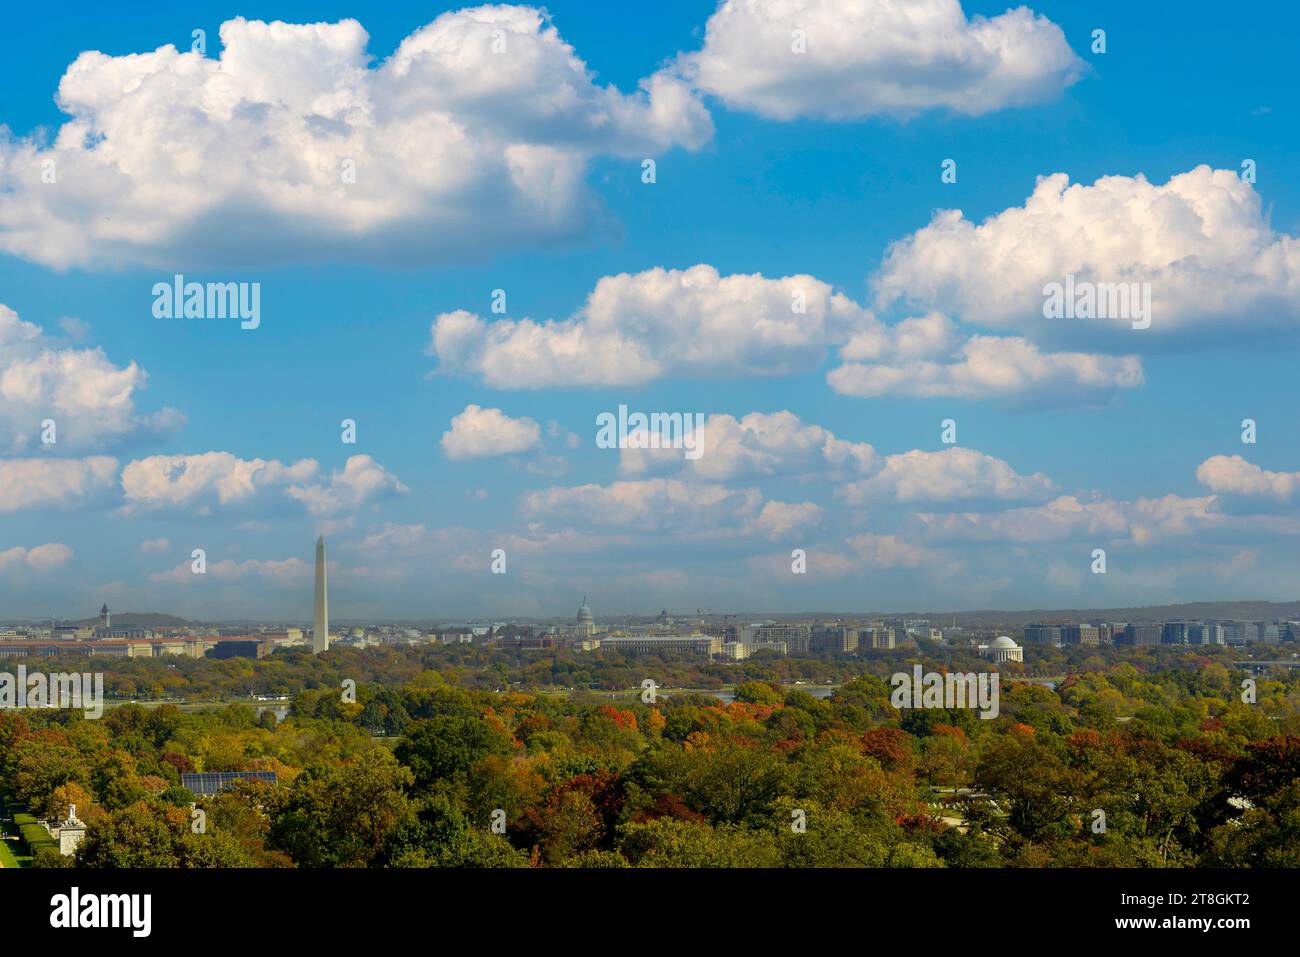 View of Washington DC from the the top of Arlington Cemetery hill in Virginia Stock Photo